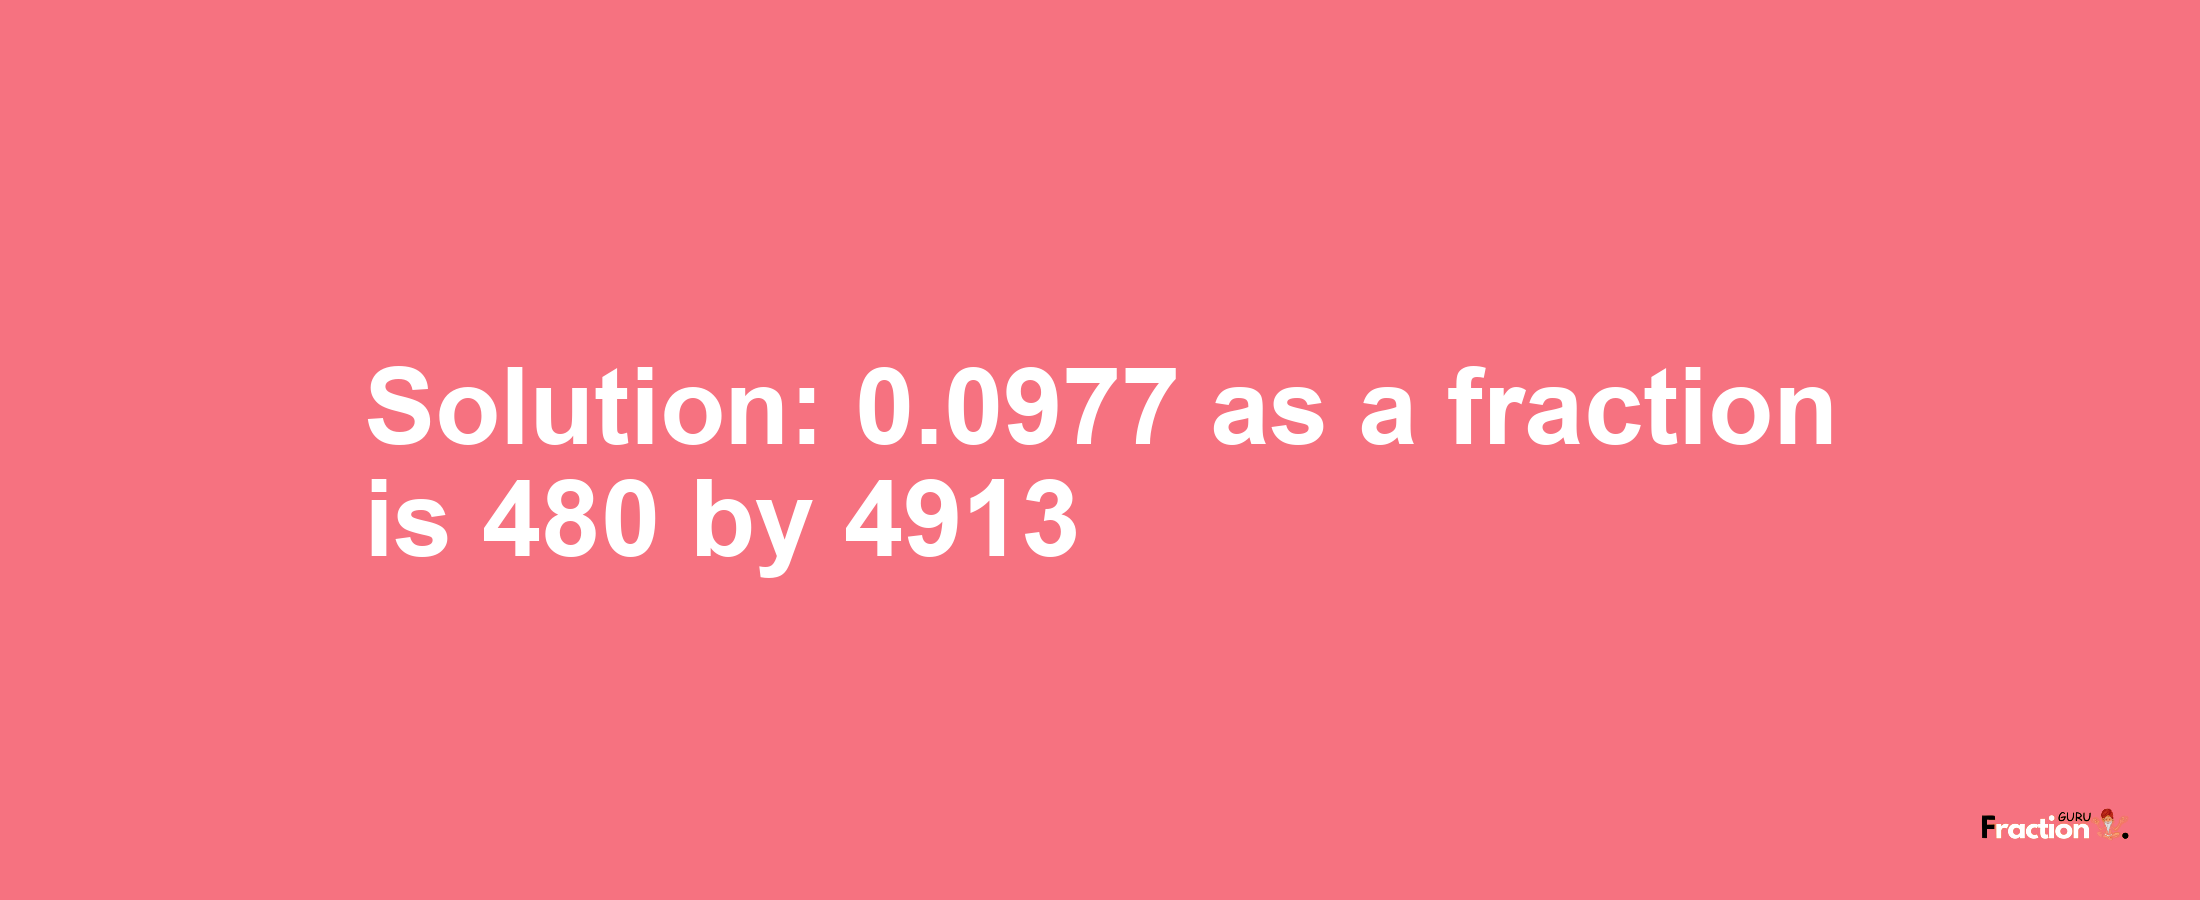 Solution:0.0977 as a fraction is 480/4913